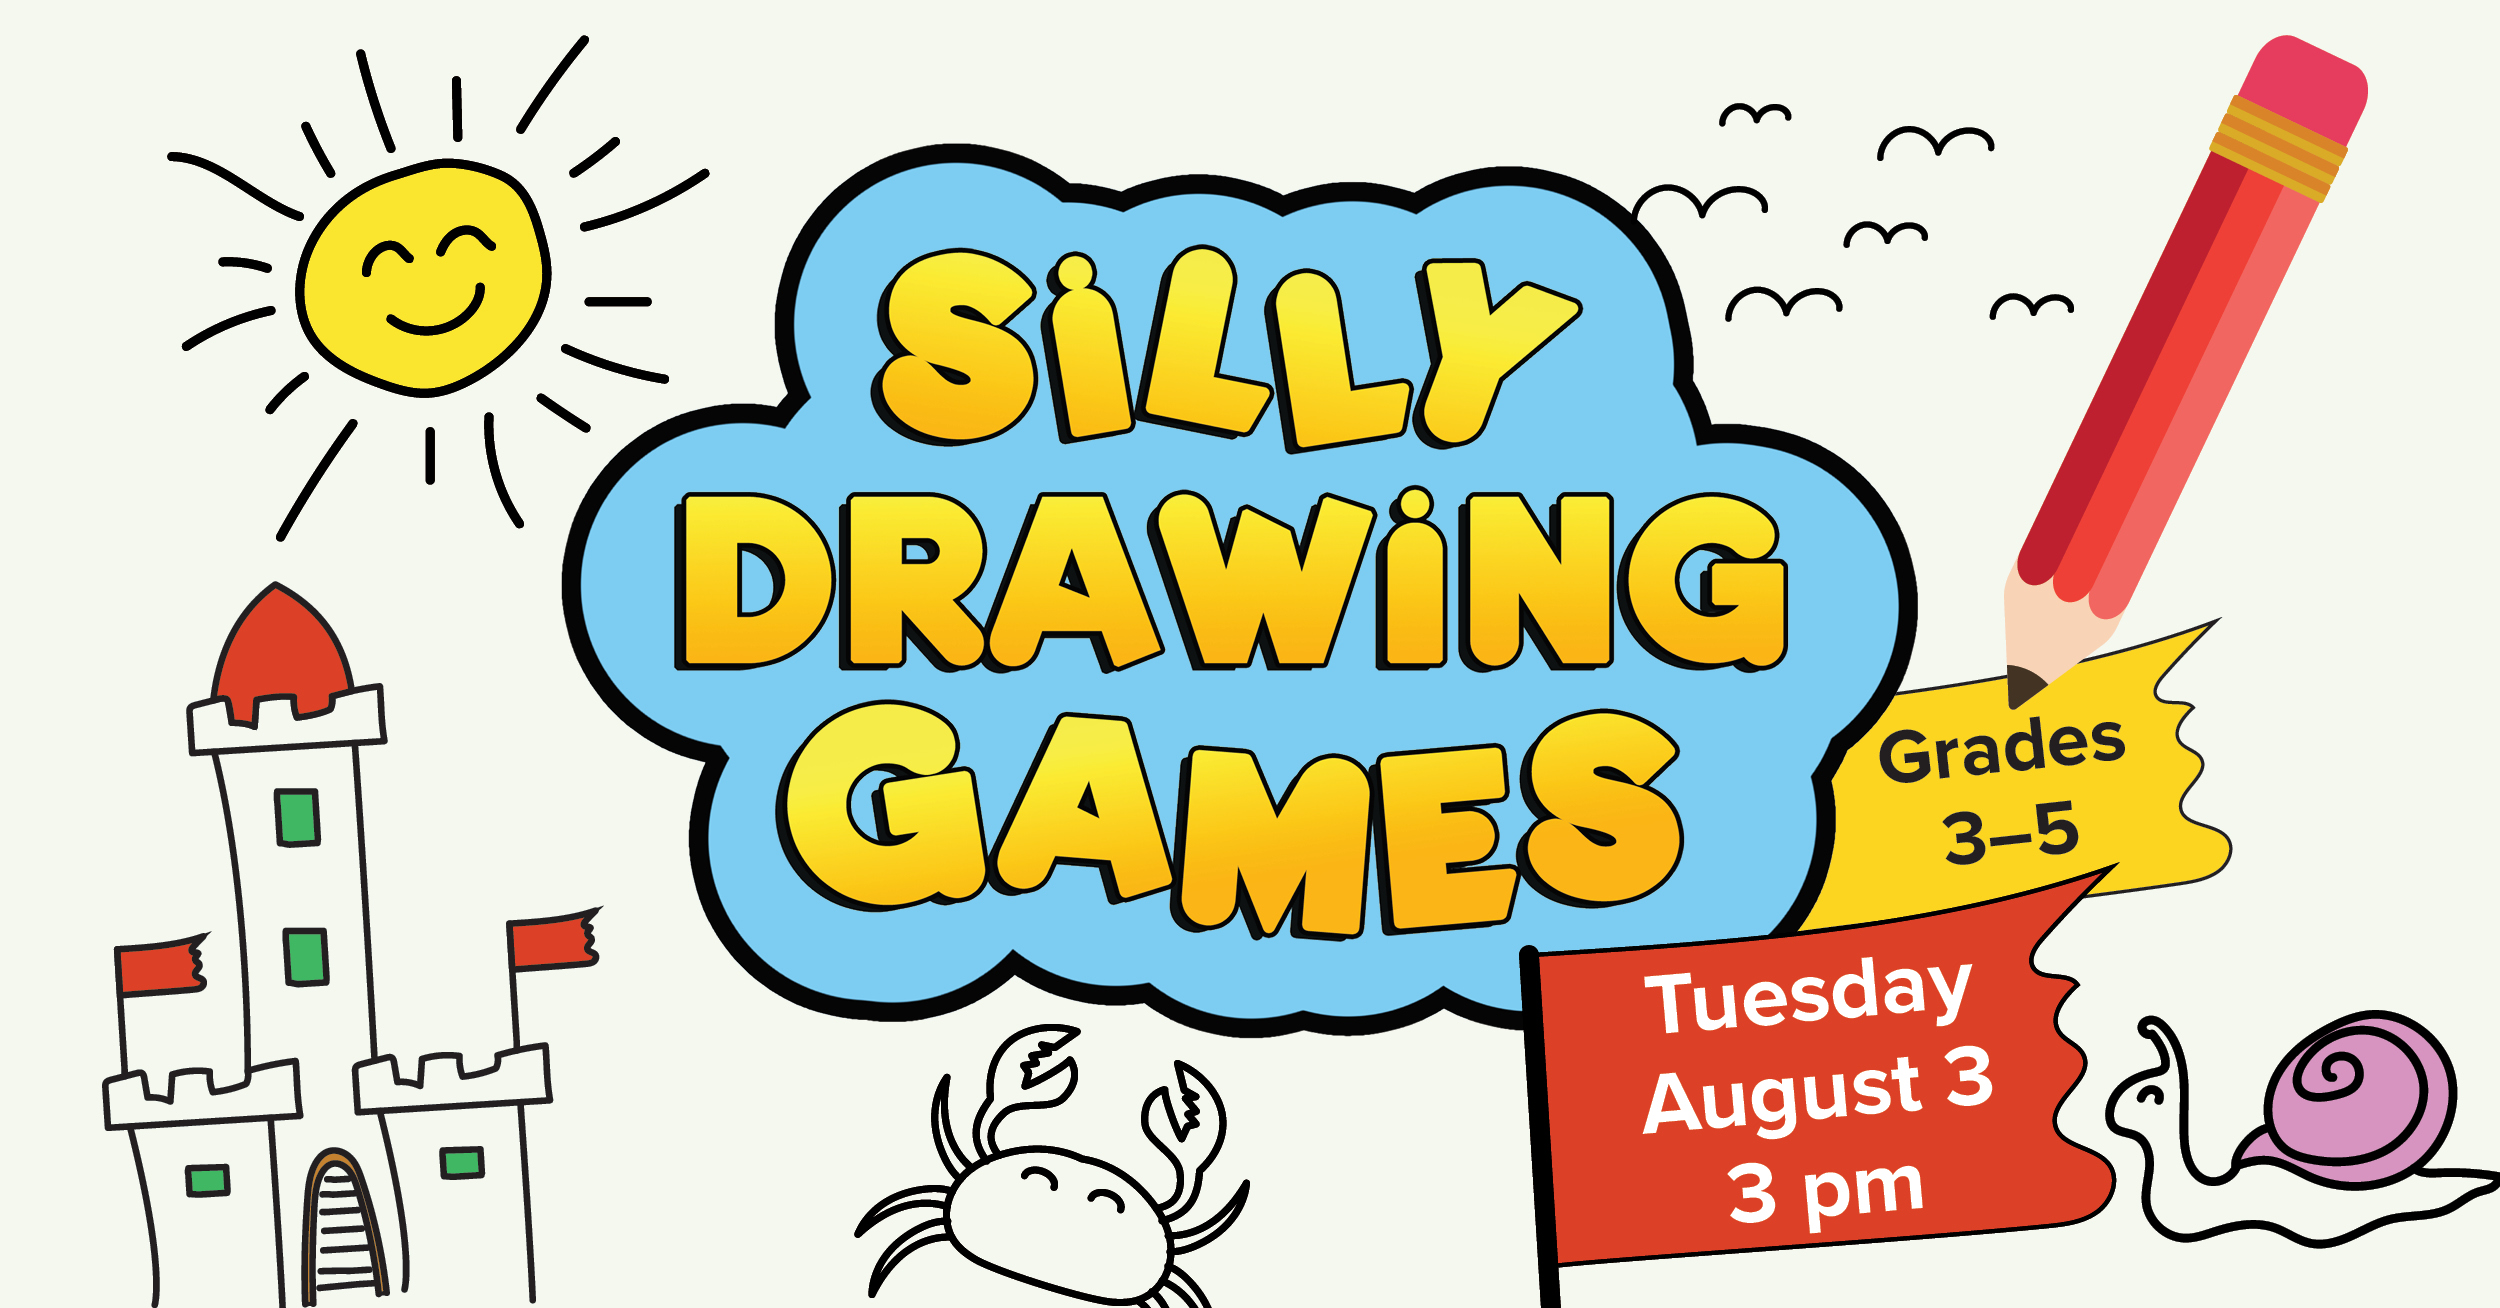 Silly Drawing Games Grades three to five. Tuesday, August third at three pm. 